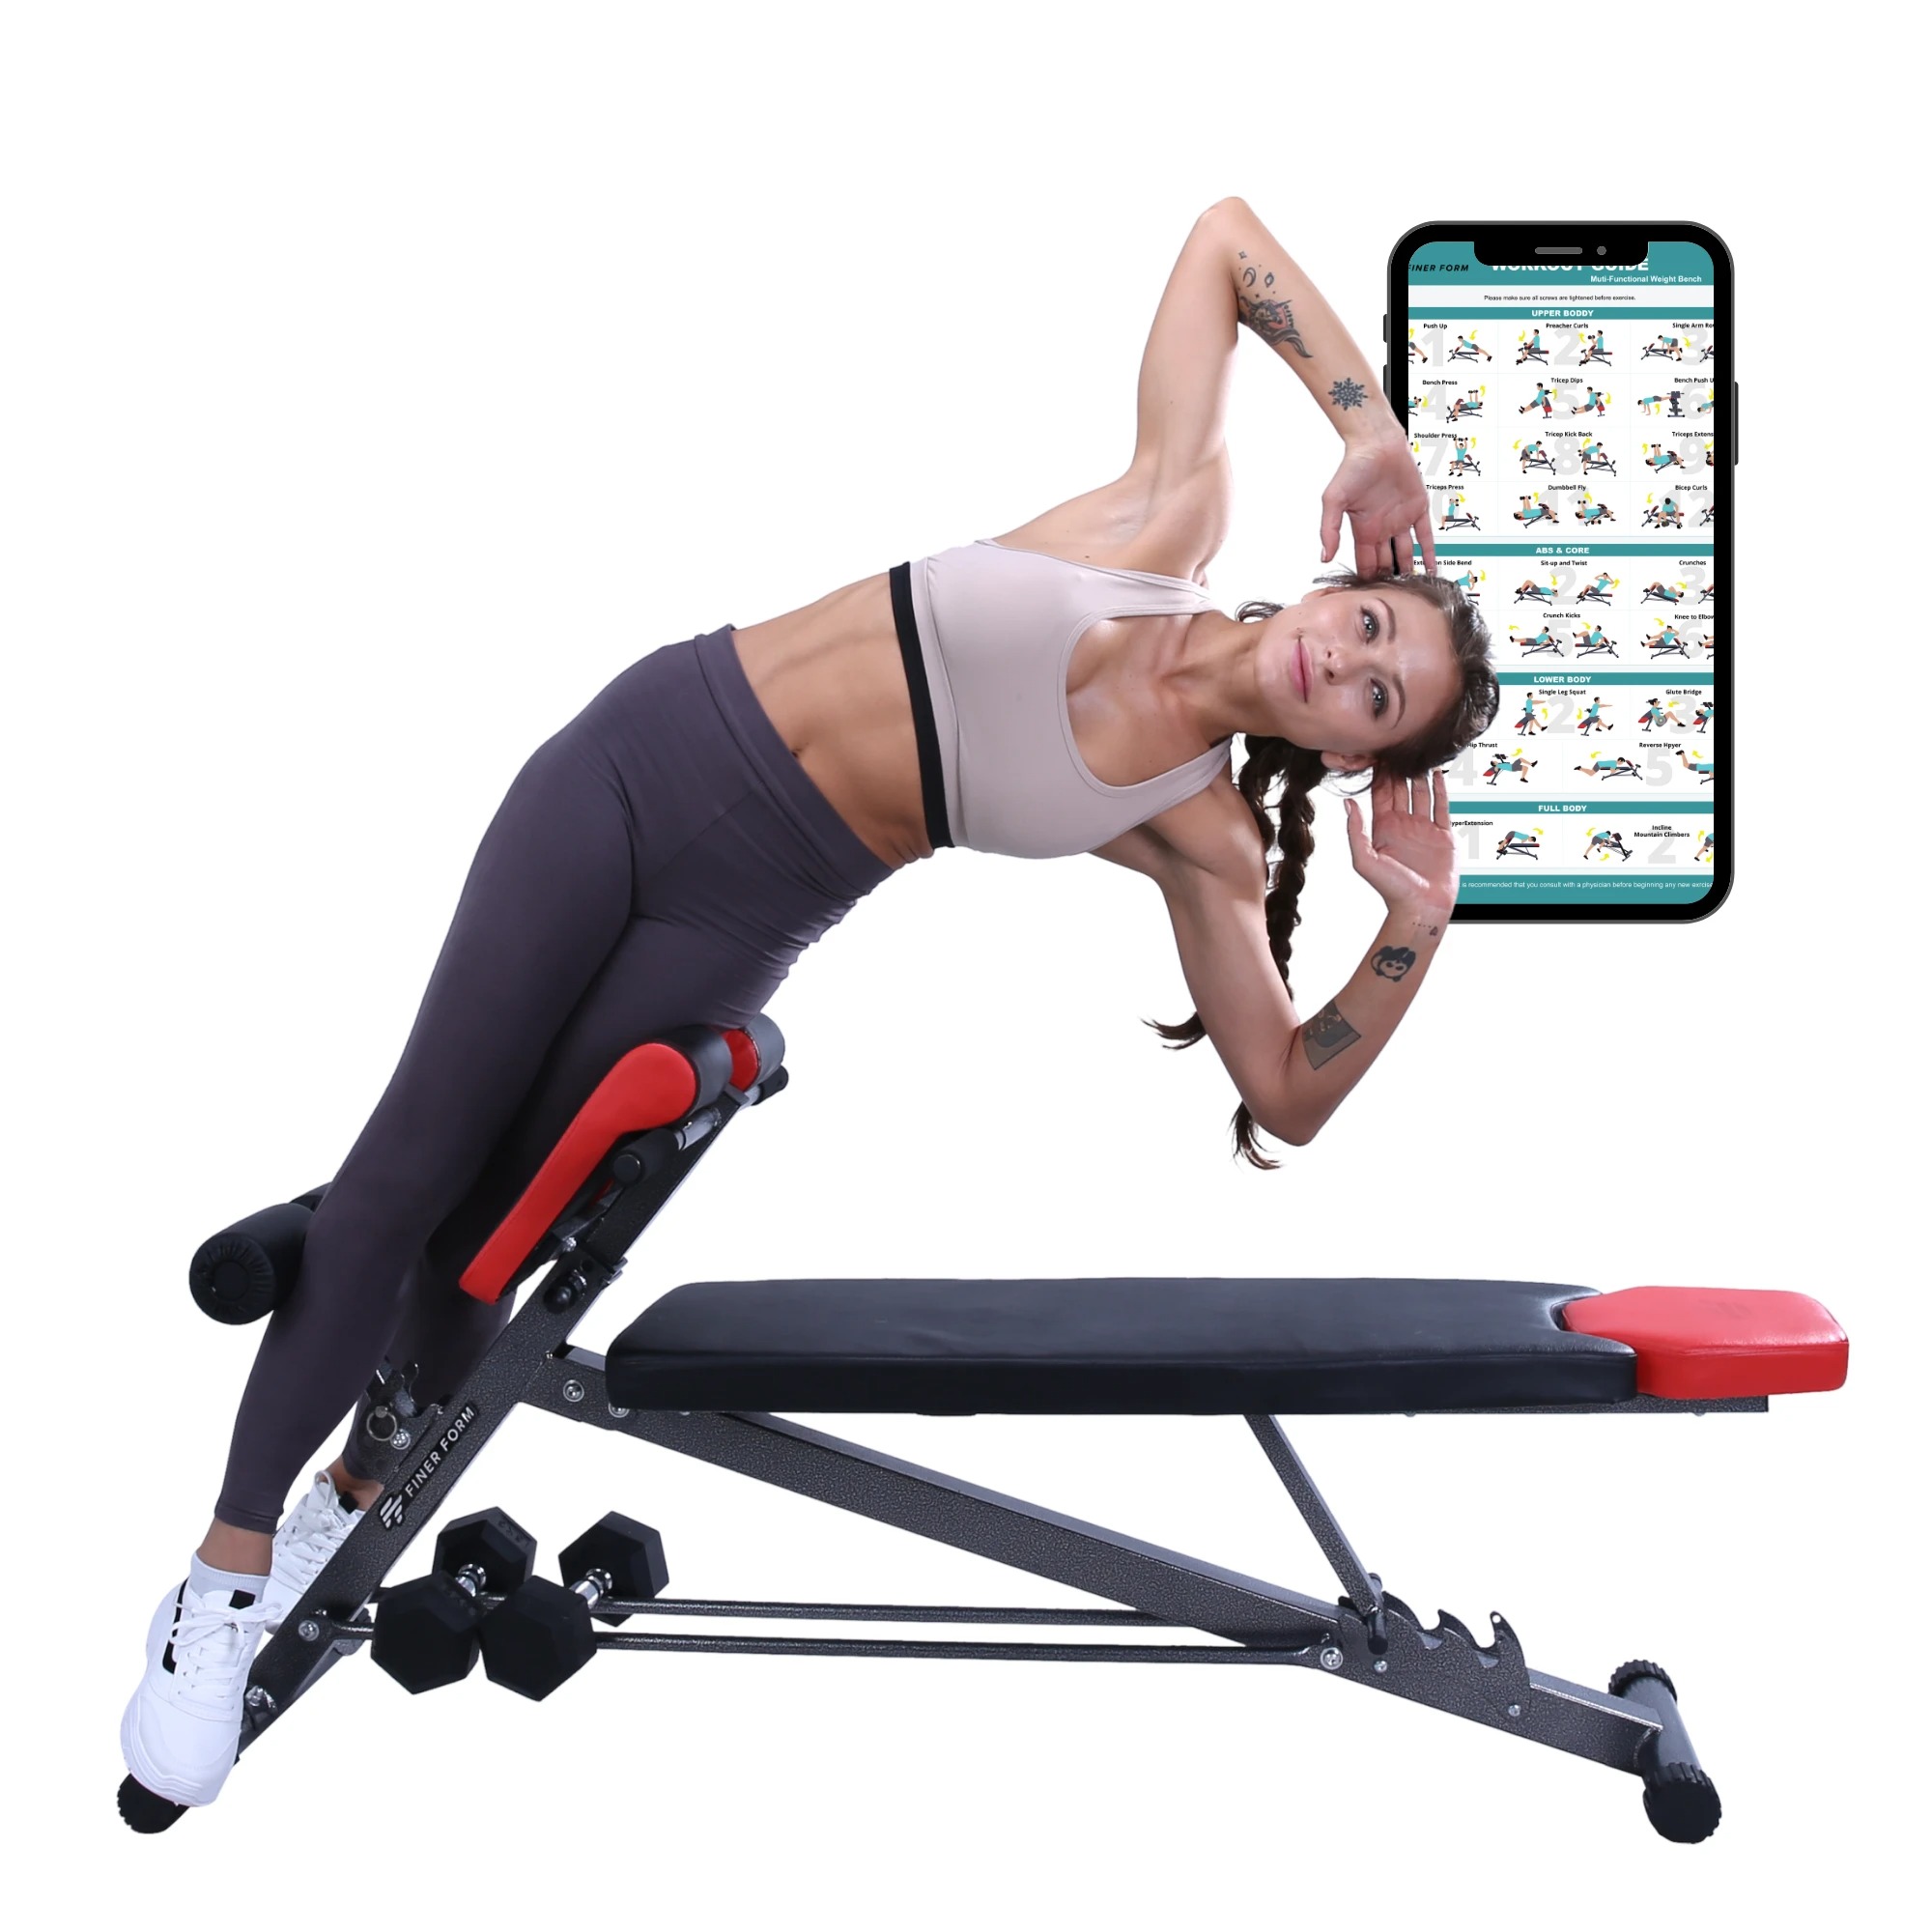 Finer Form Multi-Functional Bench for Full-Body Workout, $125.88 + Free Shipping